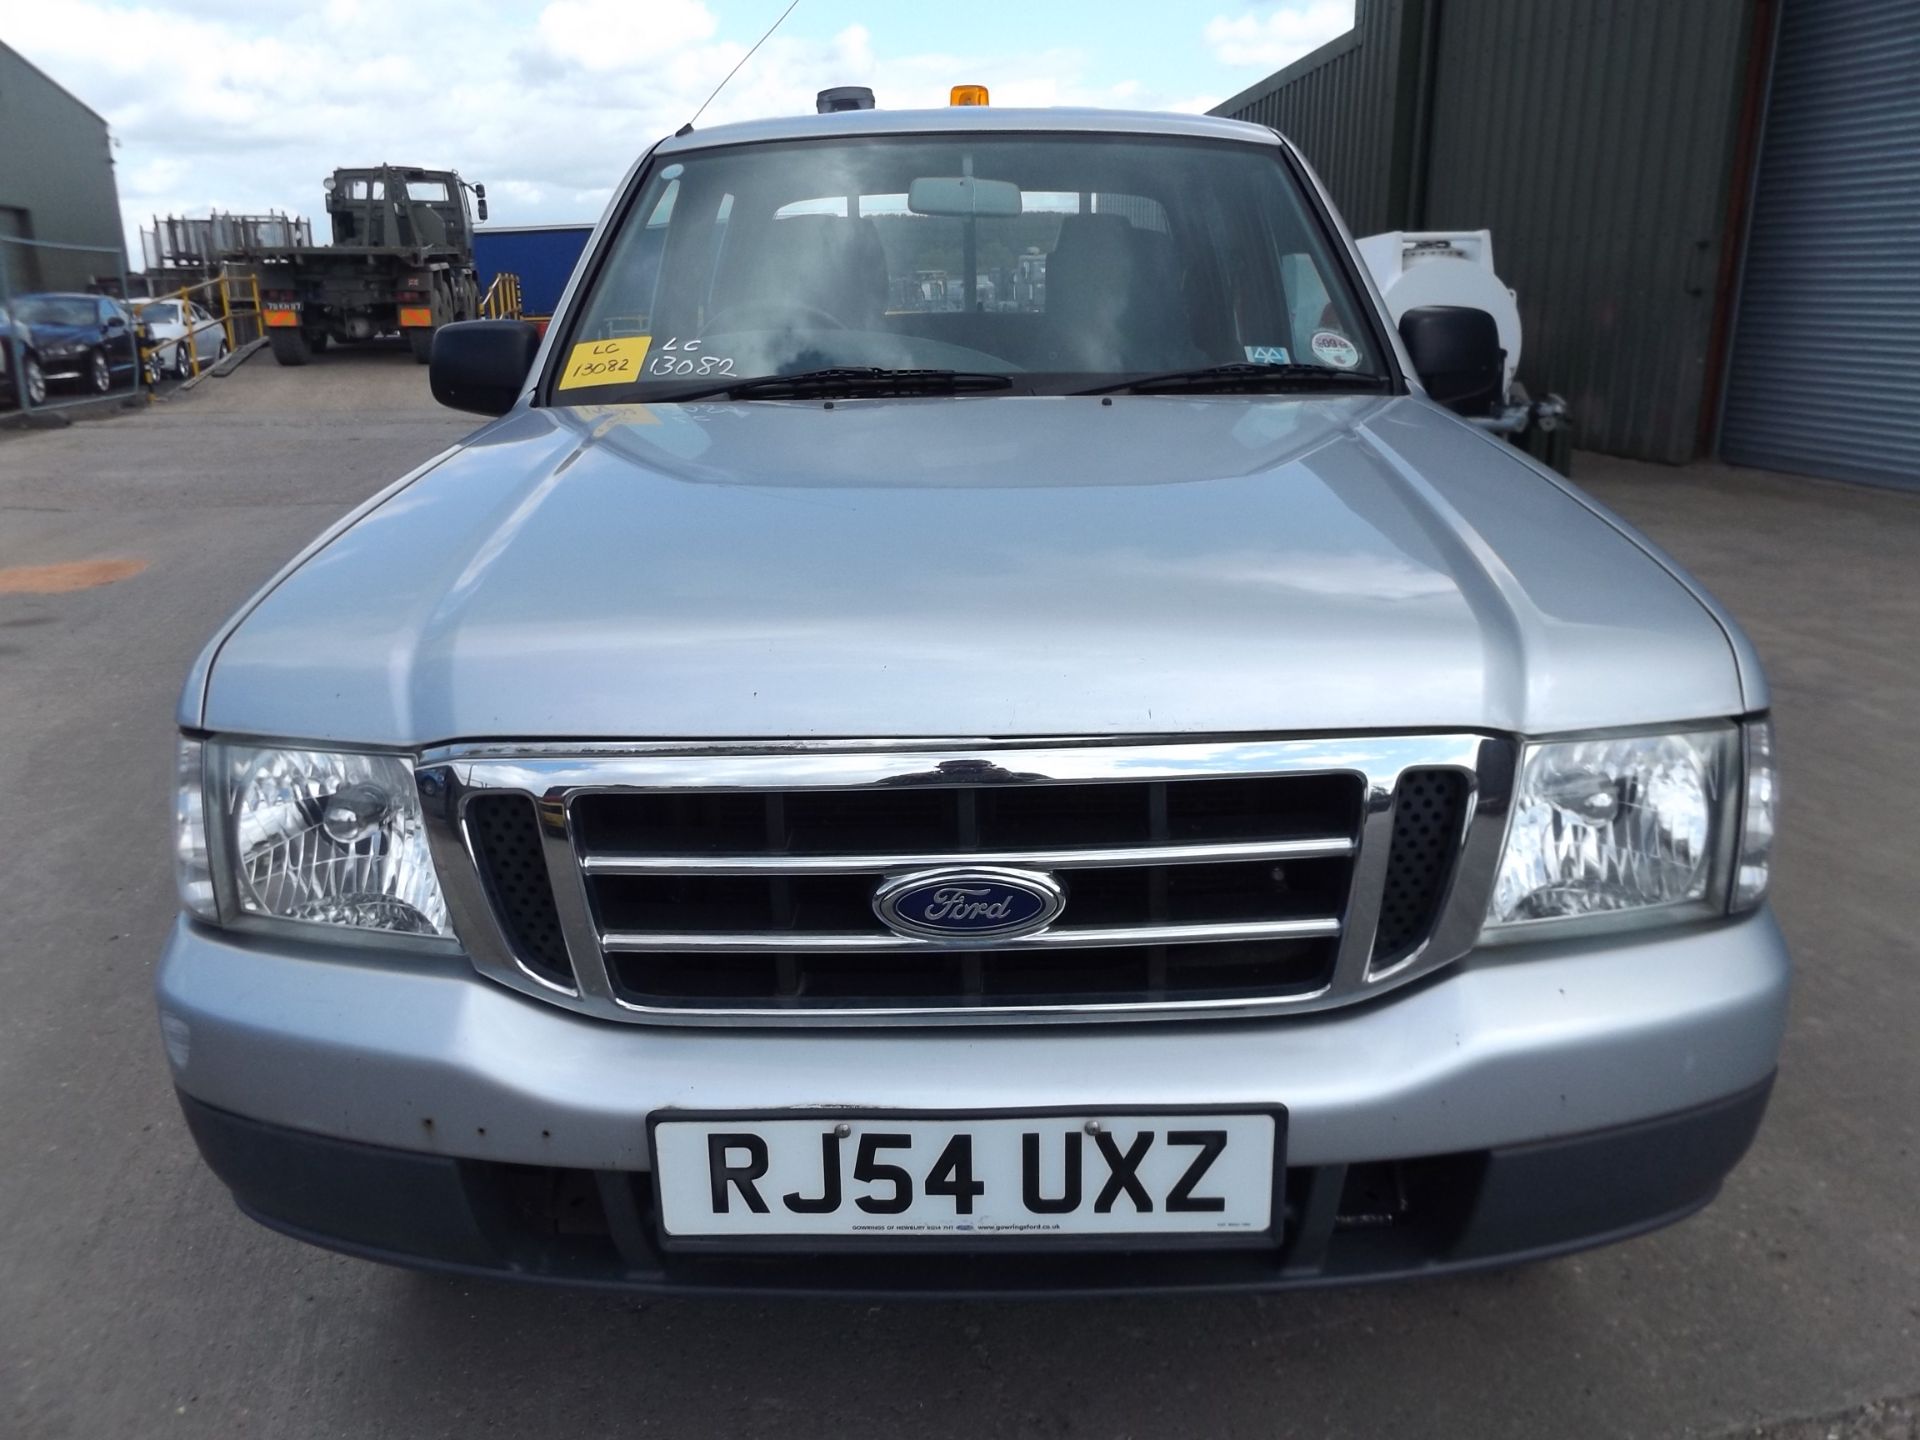 Ford Ranger Double cab pick up - Image 2 of 15